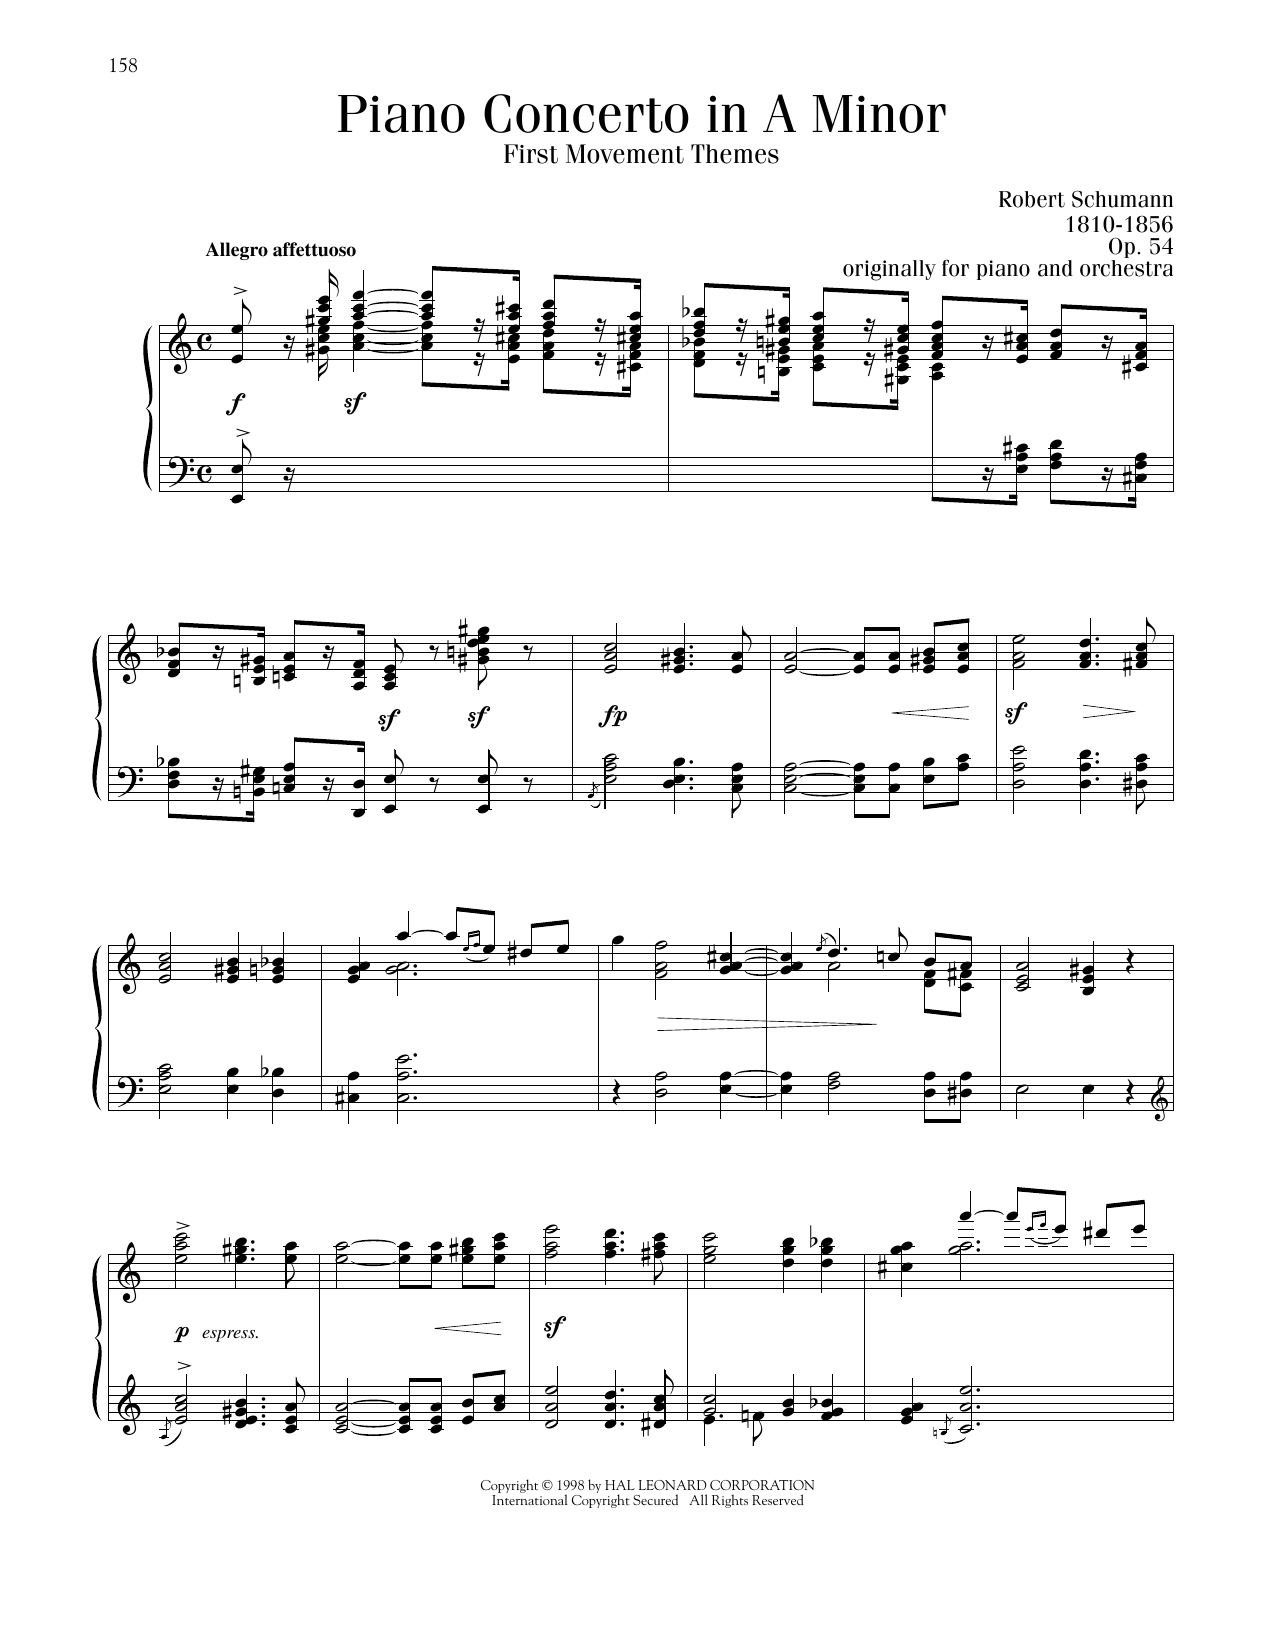 Download Robert Schumann Piano Concerto in A Minor, First Moveme Sheet Music